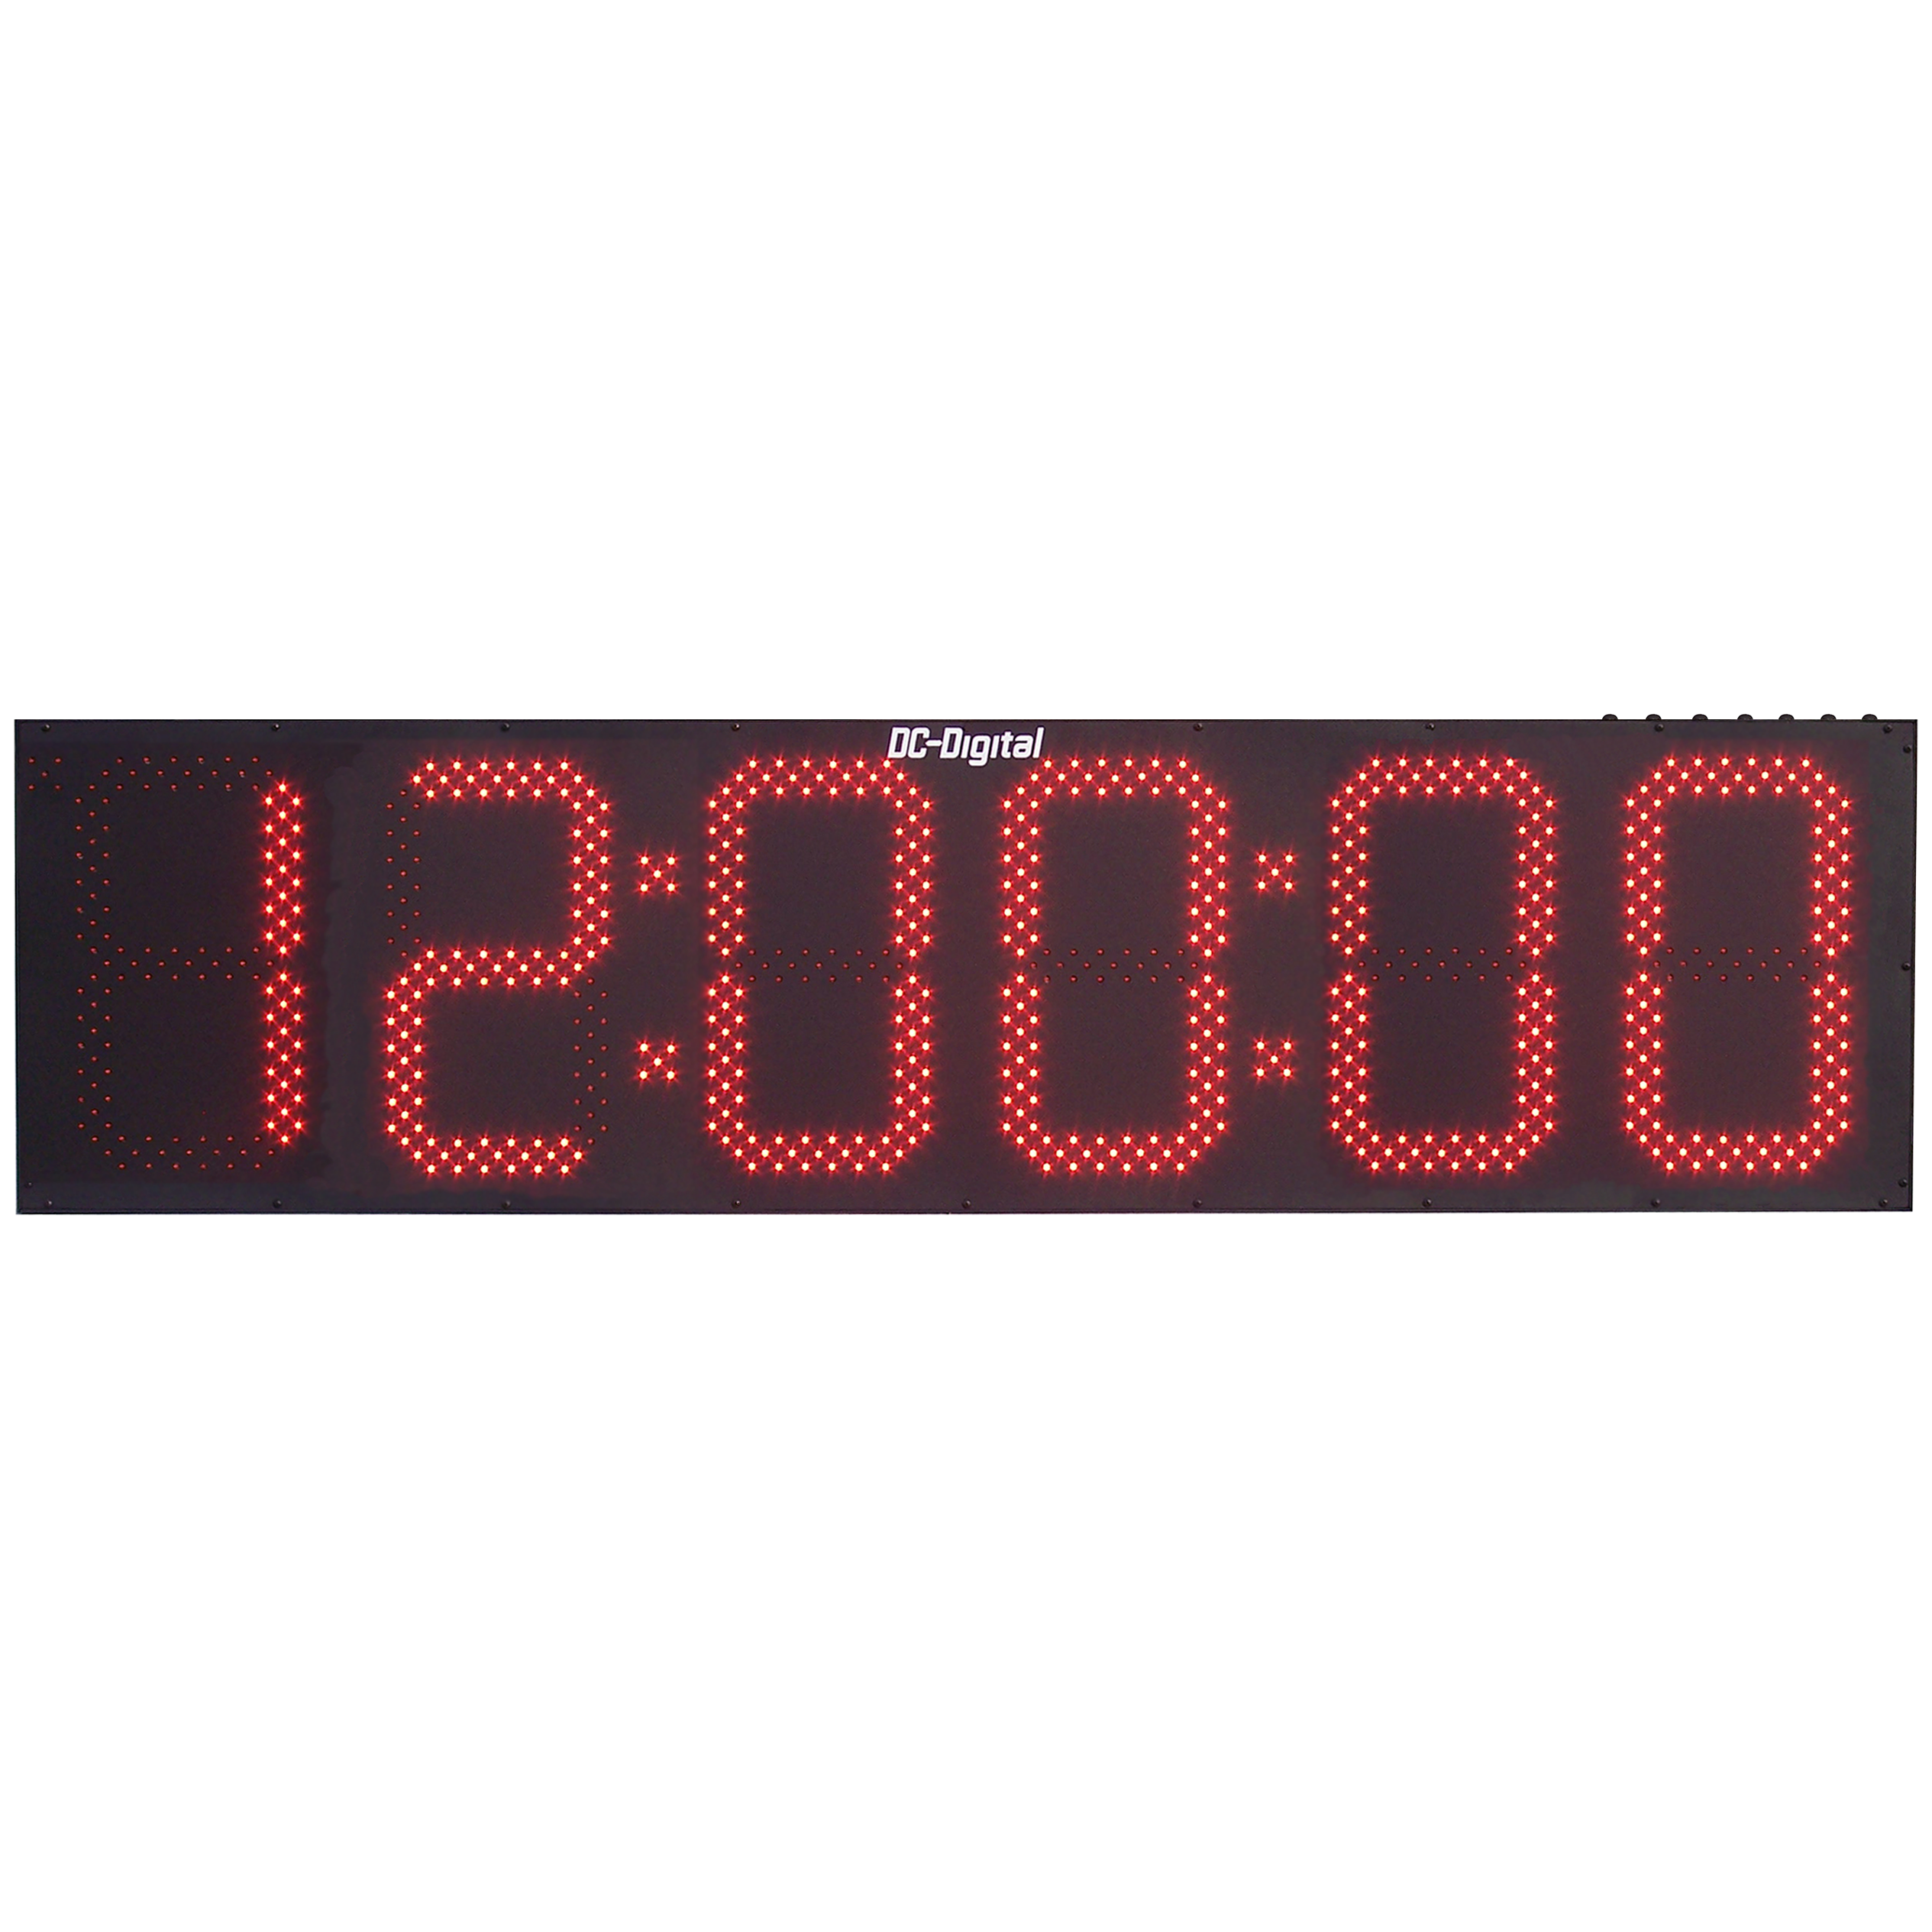 (DC-156UT) 15.0 Inch LED, Push-Button Controlled, Count Up, Countdown Timer, Time-of-Day Clock, Hours, Minutes, Seconds (OUTDOOR)